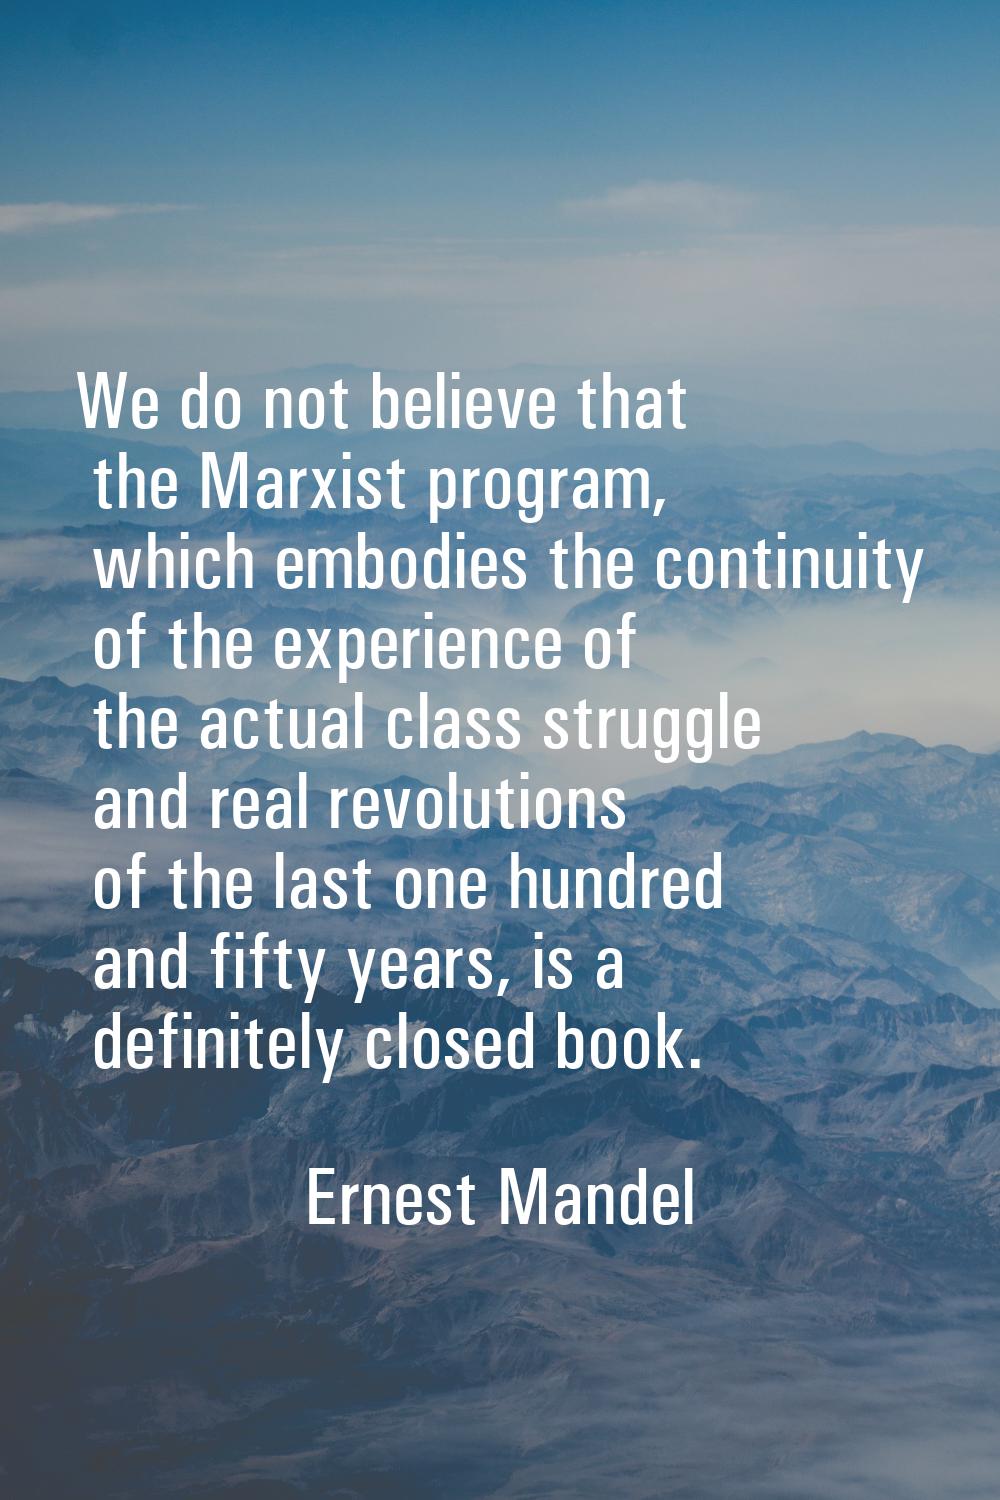 We do not believe that the Marxist program, which embodies the continuity of the experience of the 